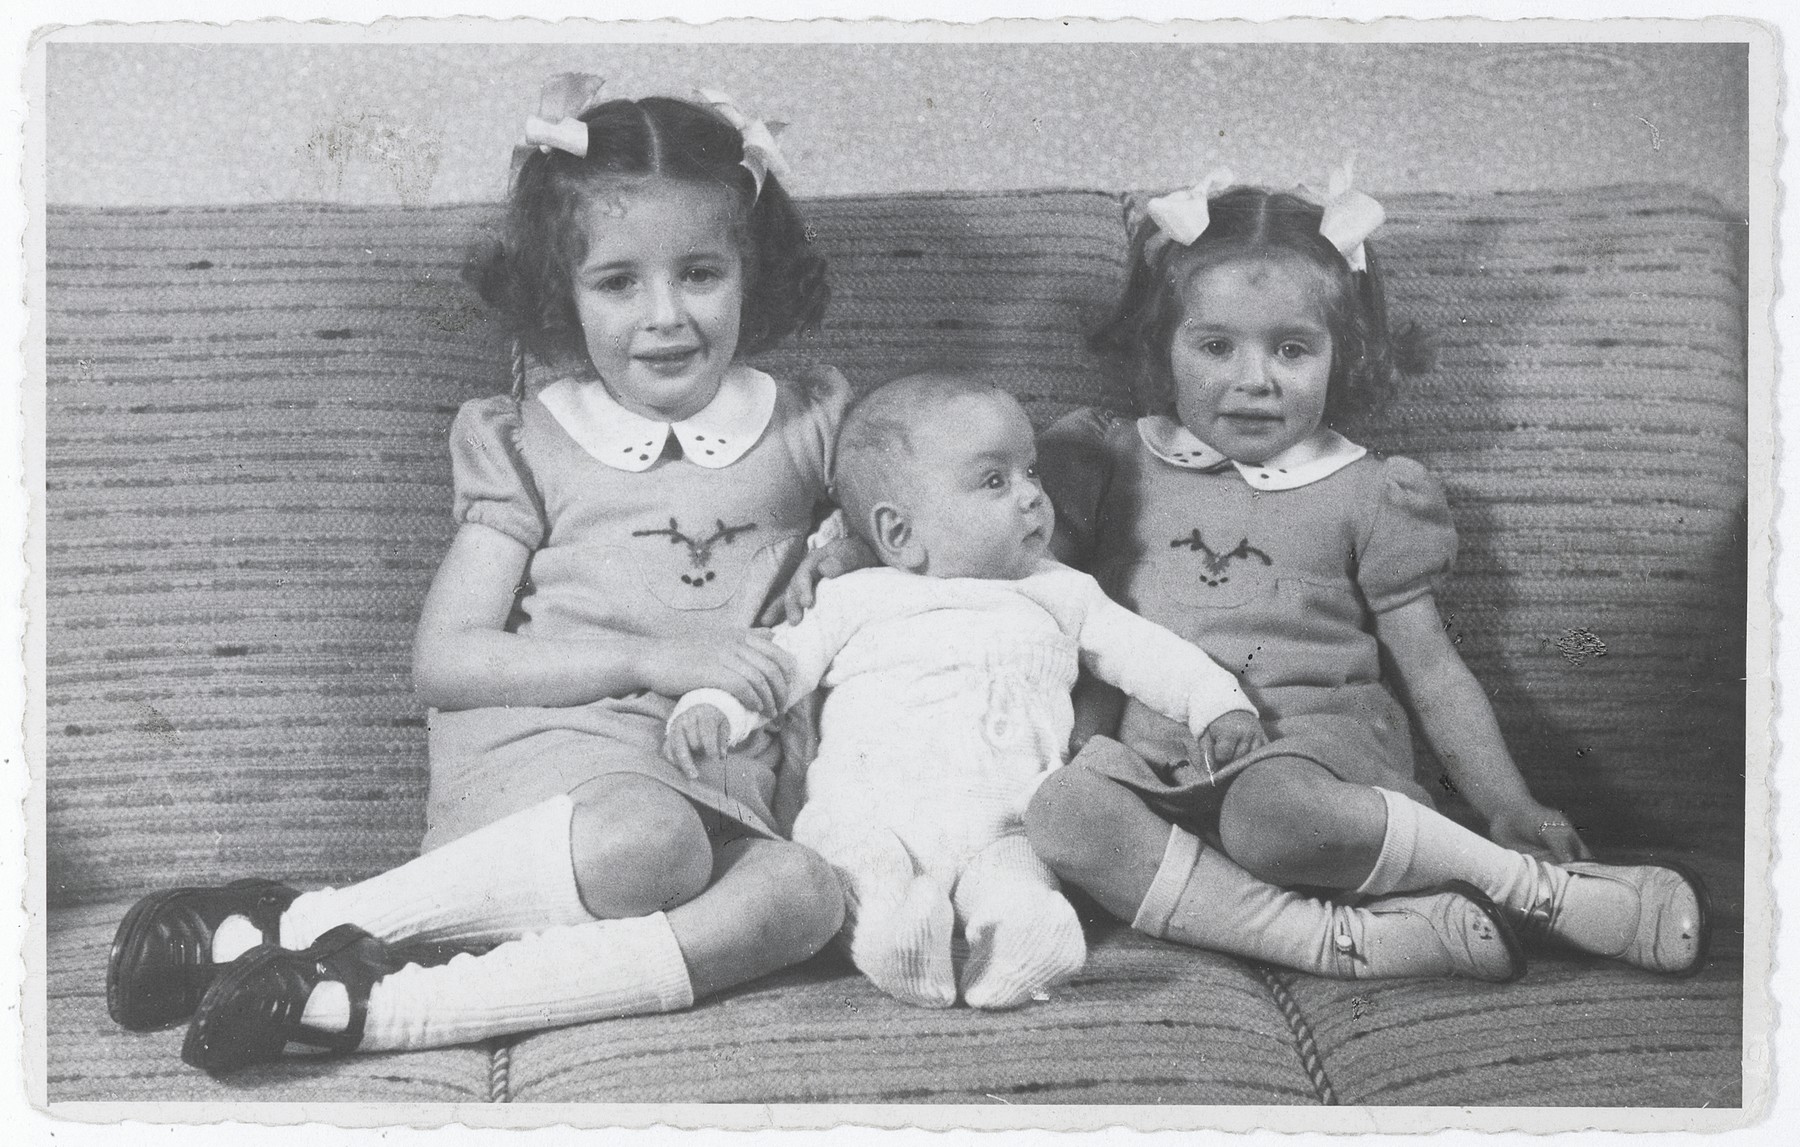 Three Jewish siblings pose on a sofa in their home in The Hague.

Pictured from left to right are Eva, Alfred and Leana Münzer.  The two girls later perished in Auschwitz.